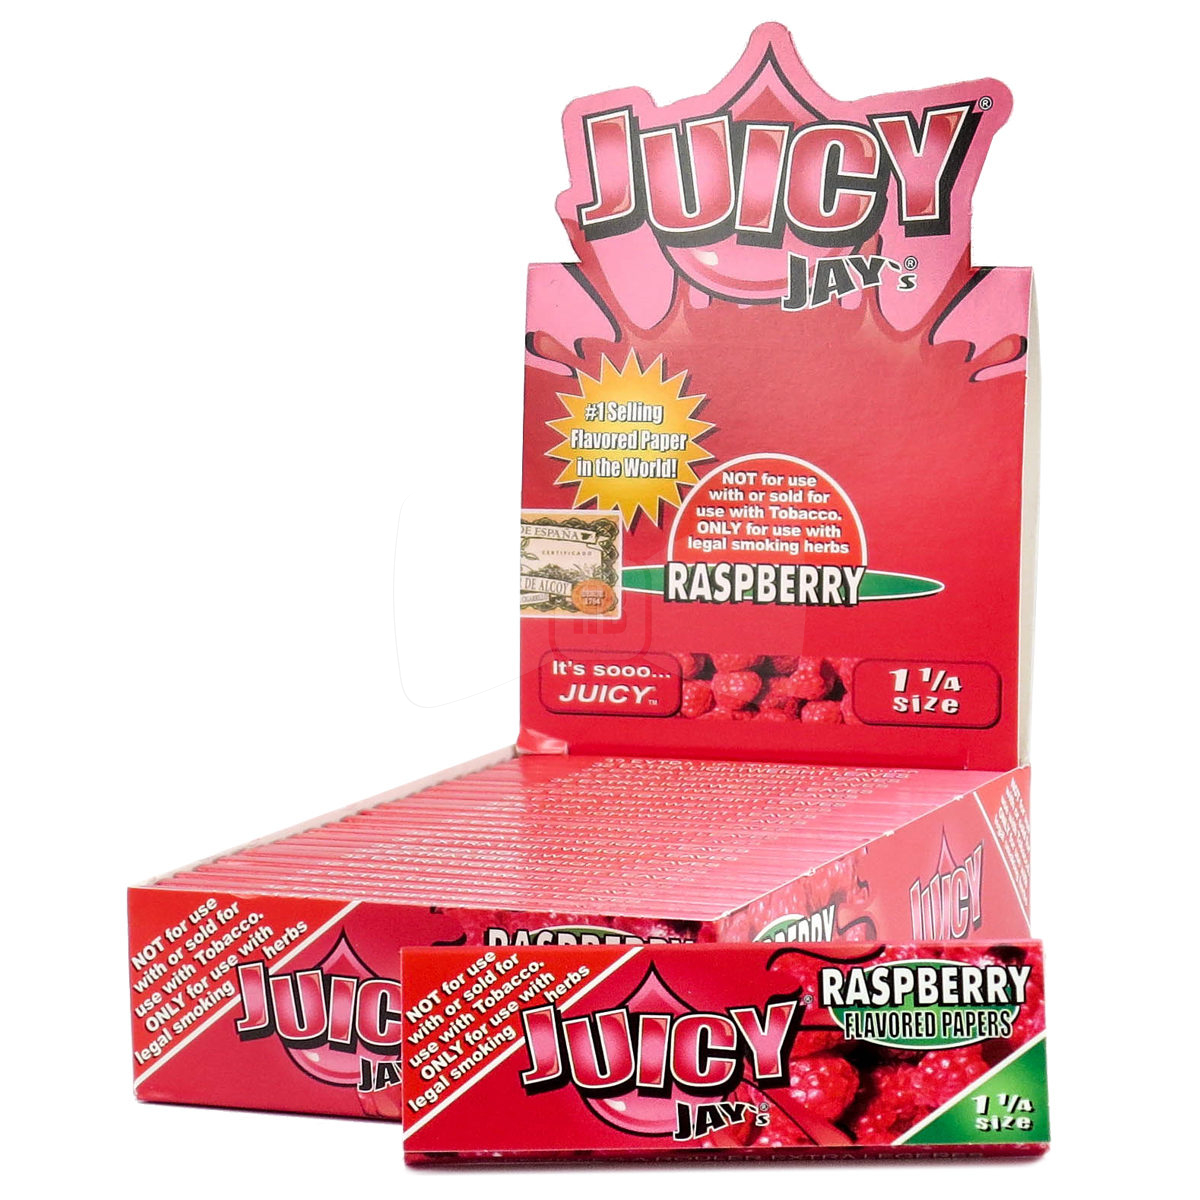 Juicy Jays Raspberry Rolling Papers Full Box (24 packs) King Size